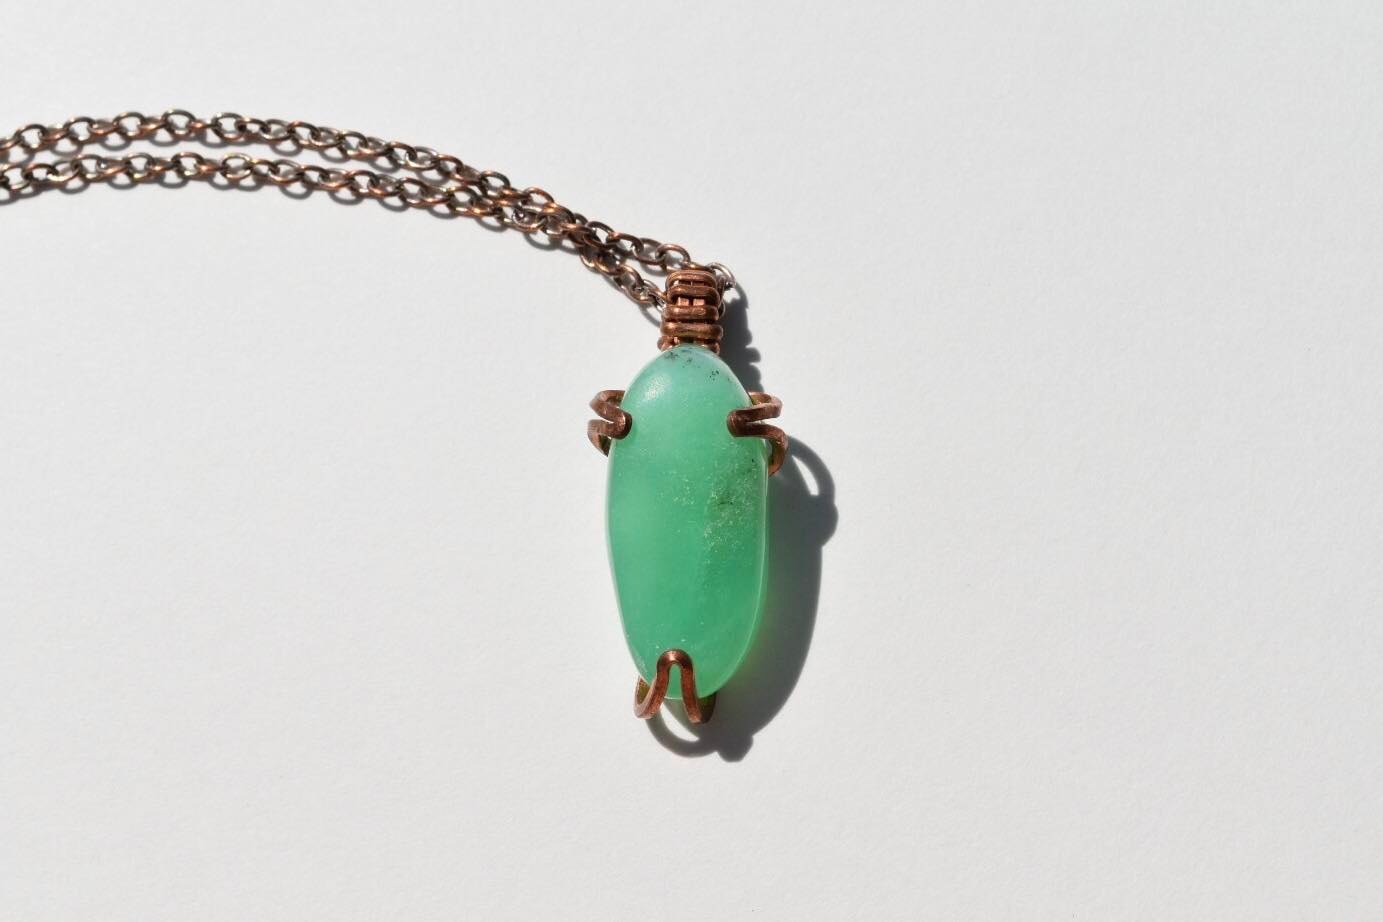 Lime Chrysoprase Wrapped in Copper Wire Pendant